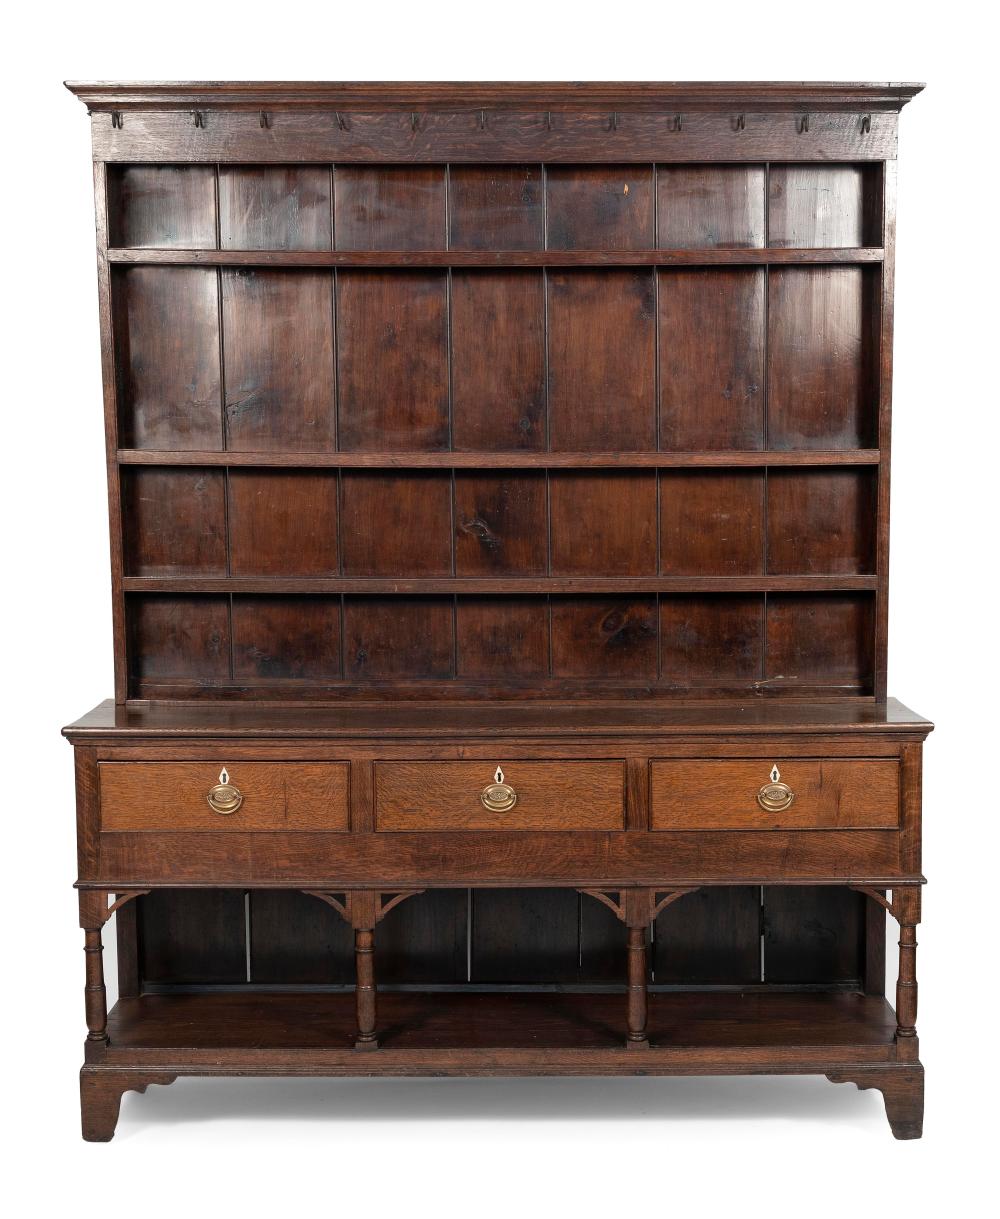 WELSH TWO-PART CUPBOARD 18TH CENTURY